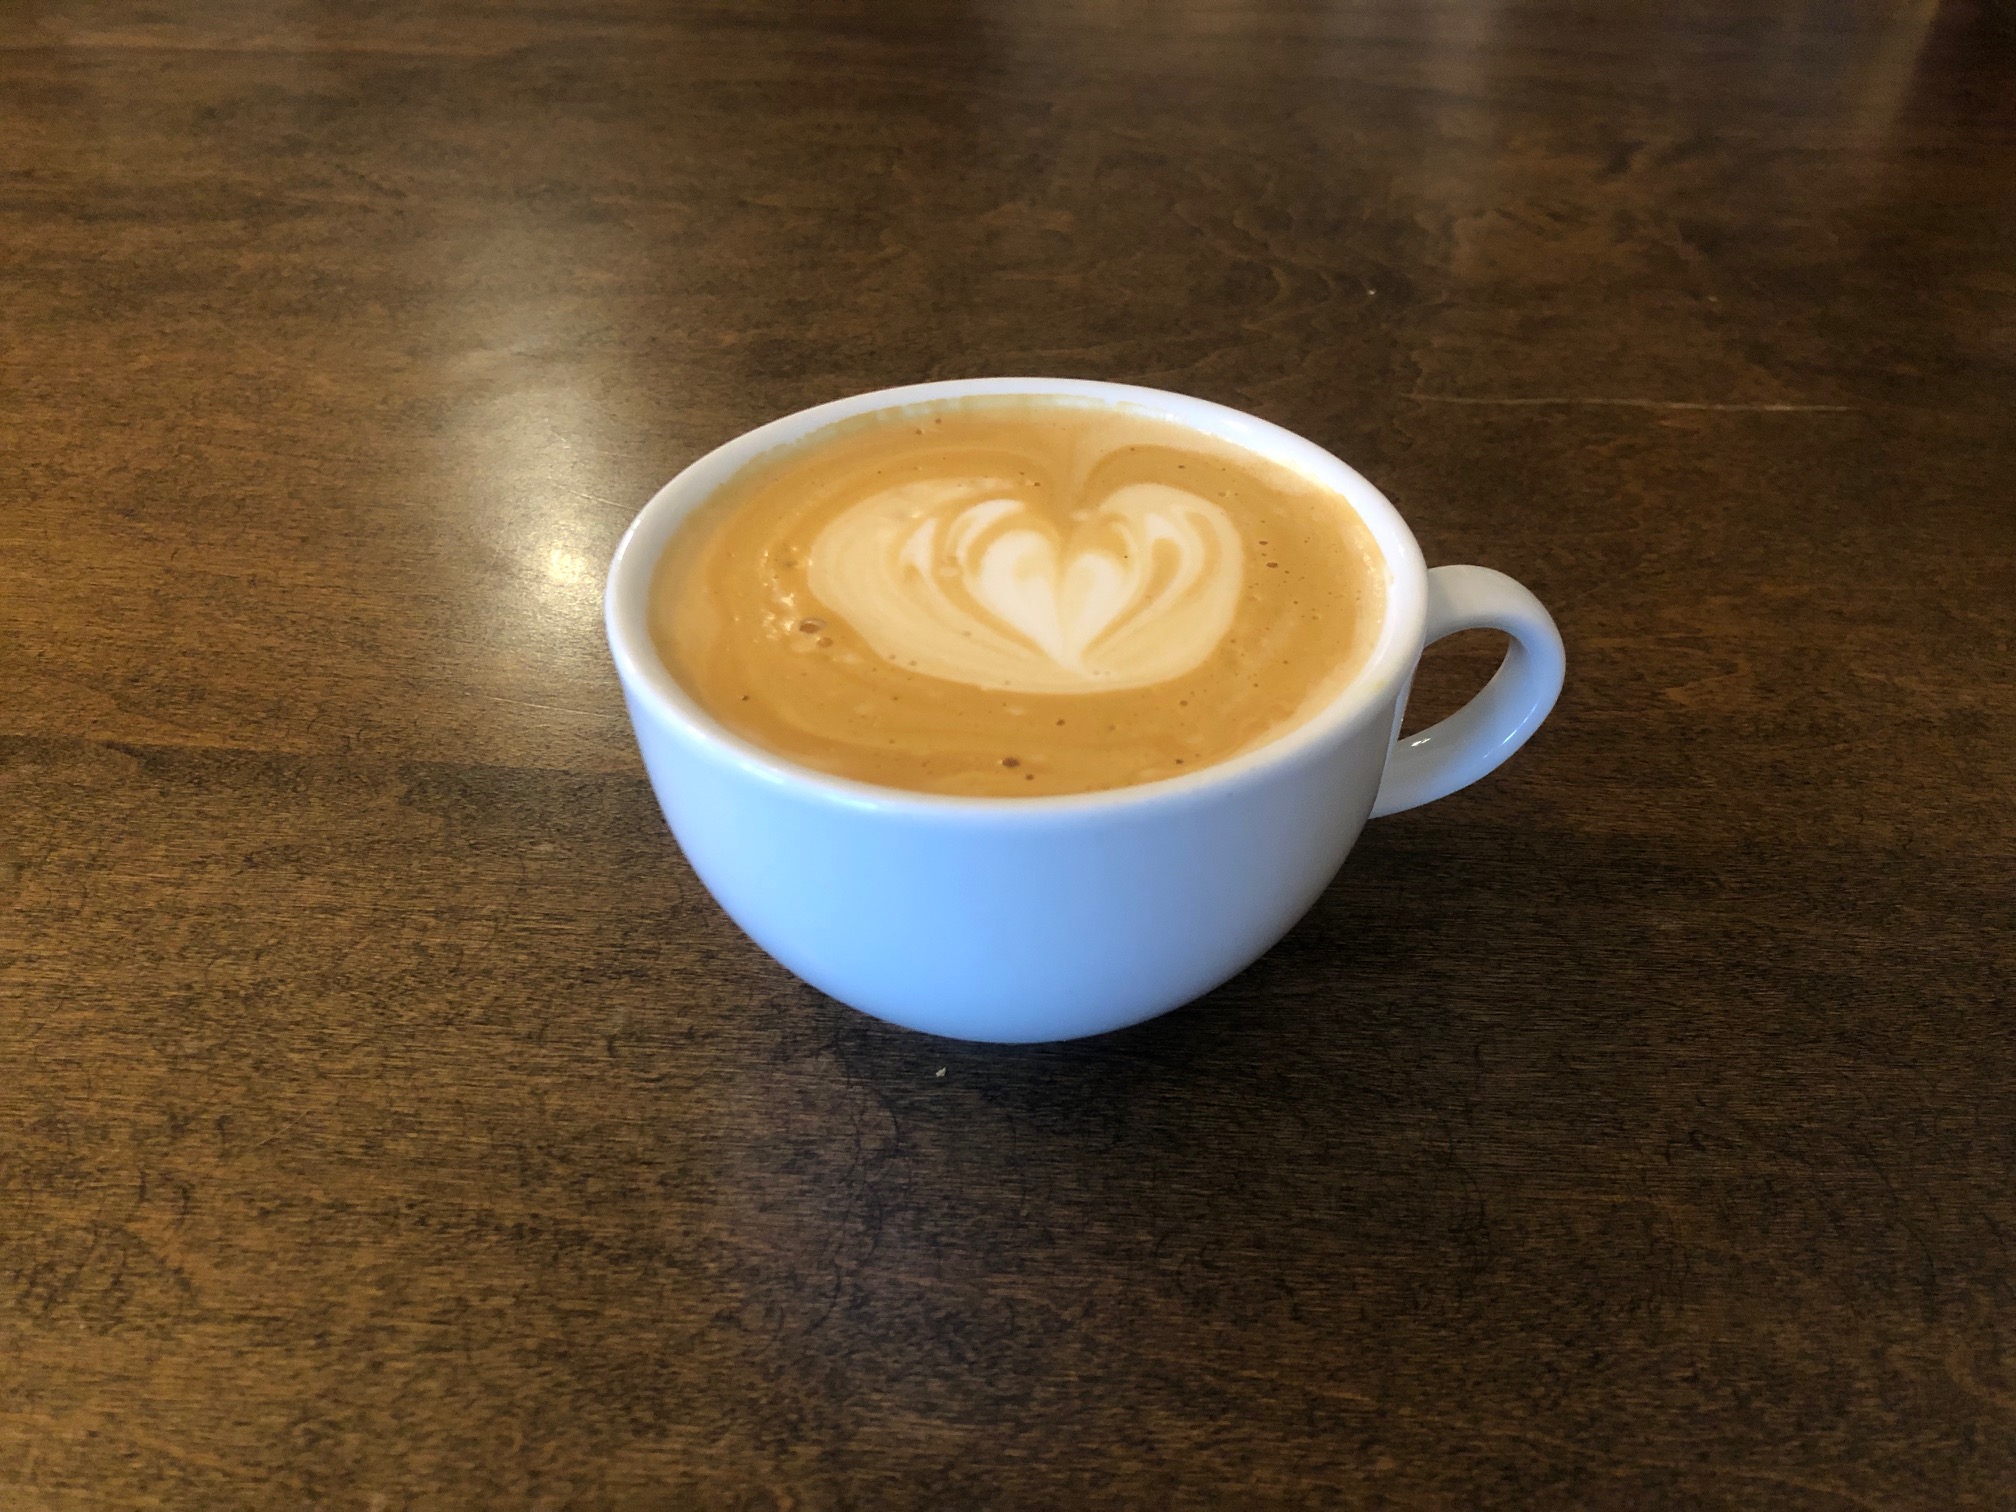 On a dark brown table, there is a white mug of coffee with a heart latte art in the foam. Photo by Alyssa Buckley.